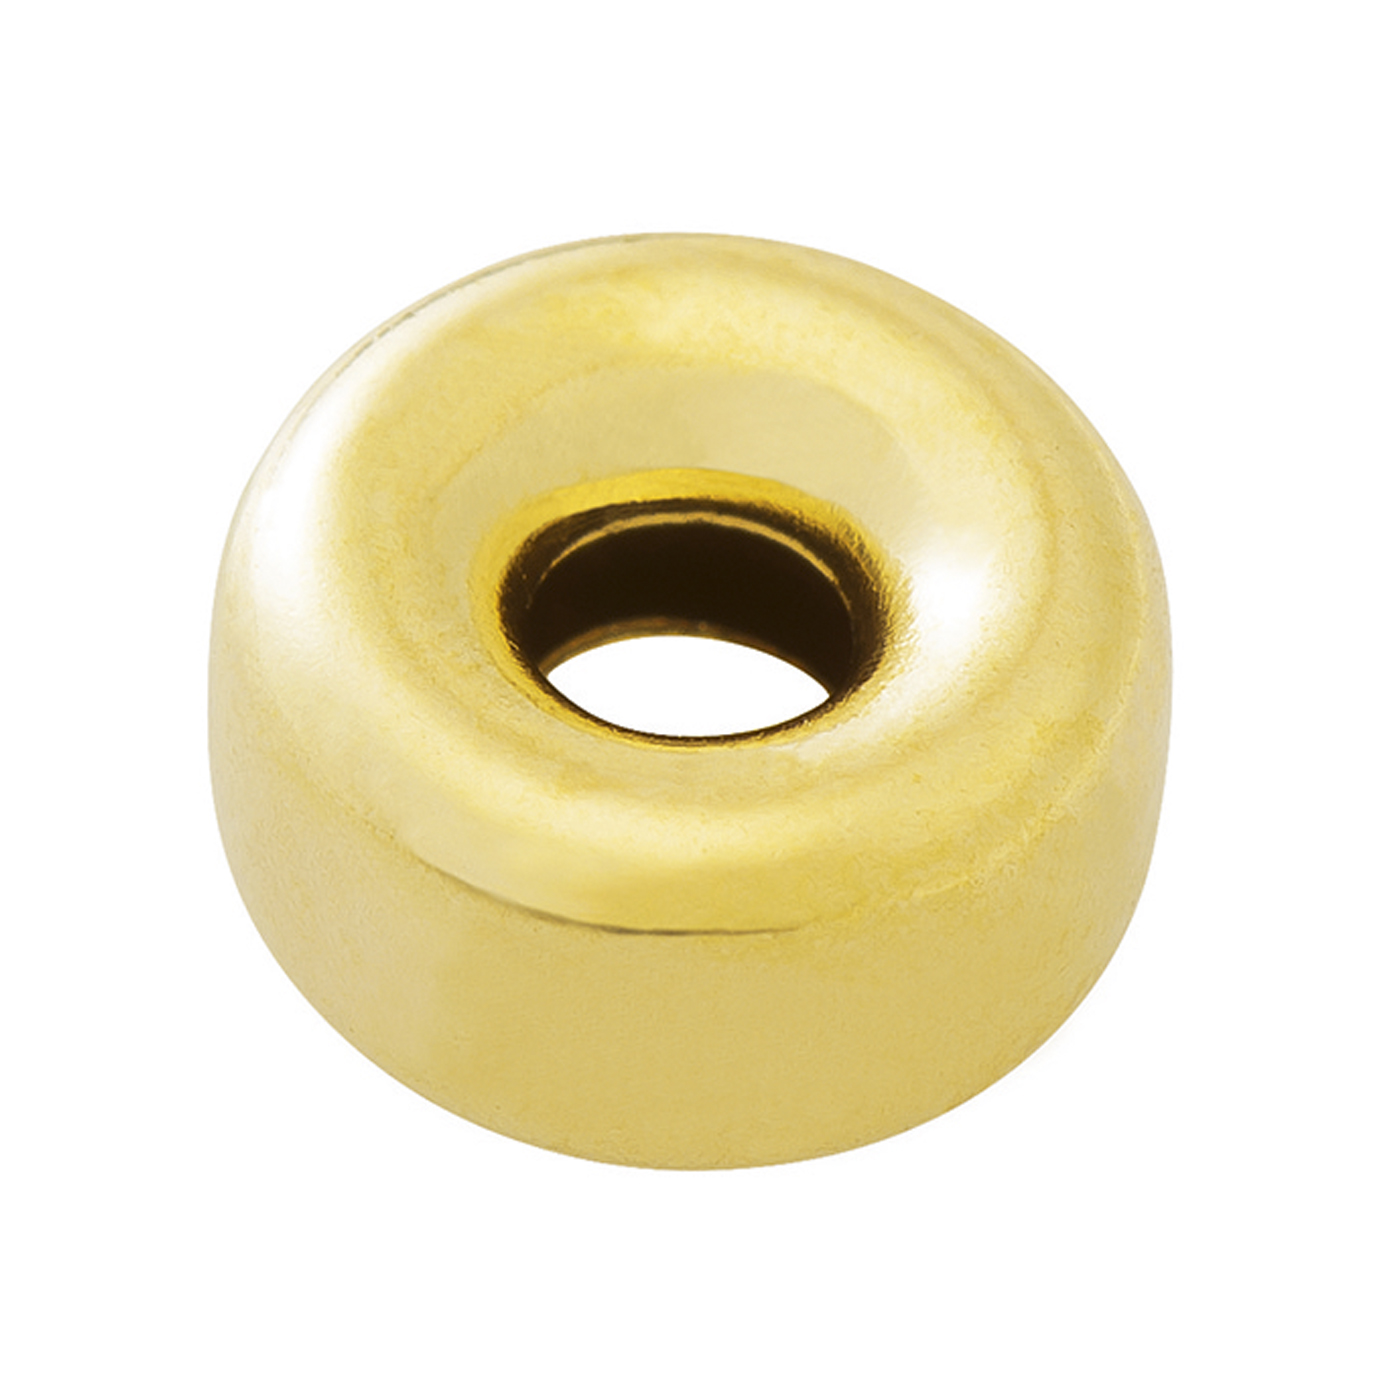 Hollow Ring, Rolled Gold Polished, ø 5 x 2.6 mm - 1 piece